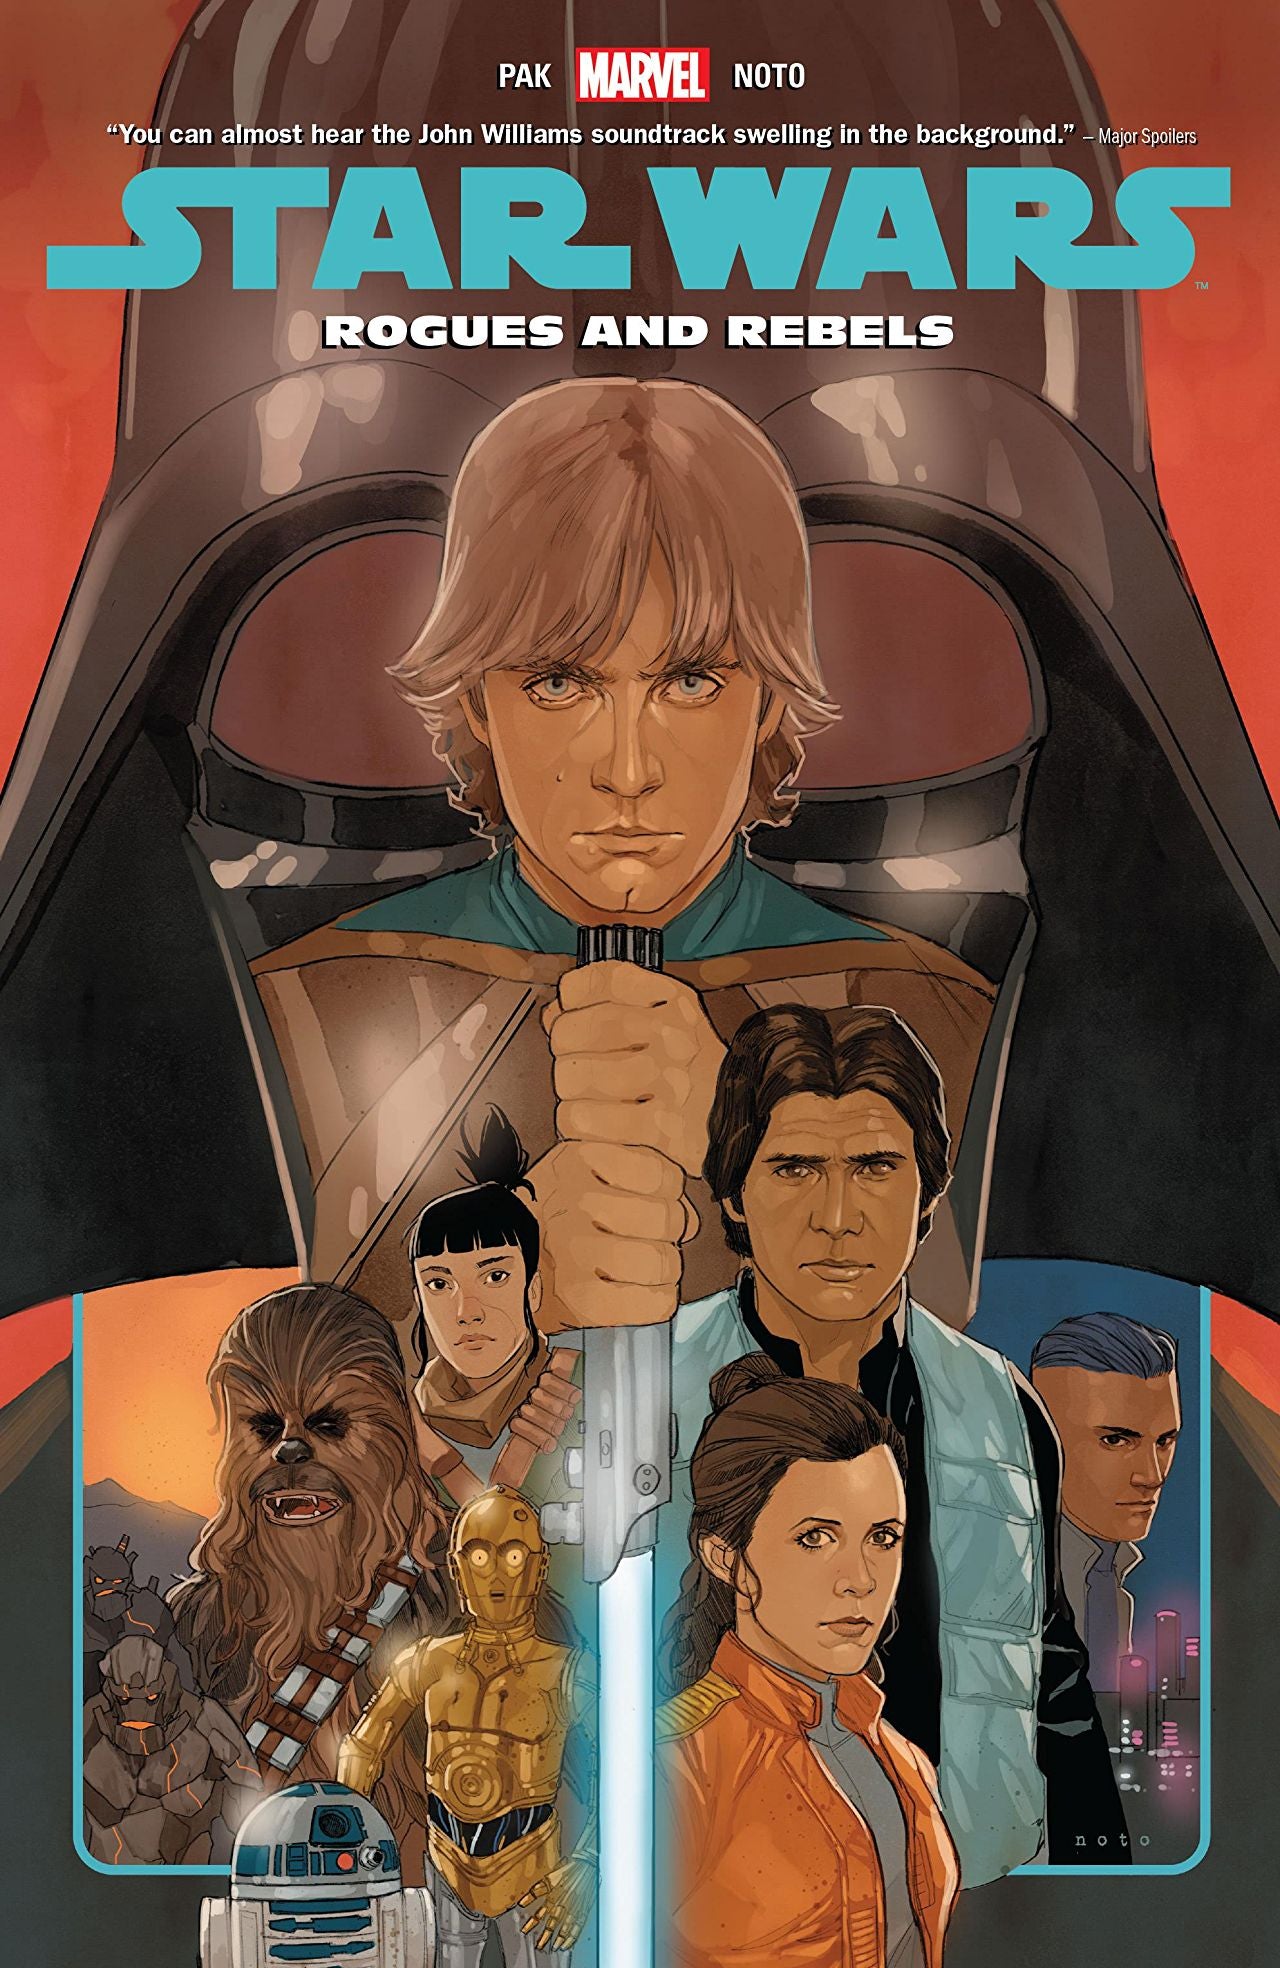 Star Wars (2015) Volume 13: Rogues and Rebels